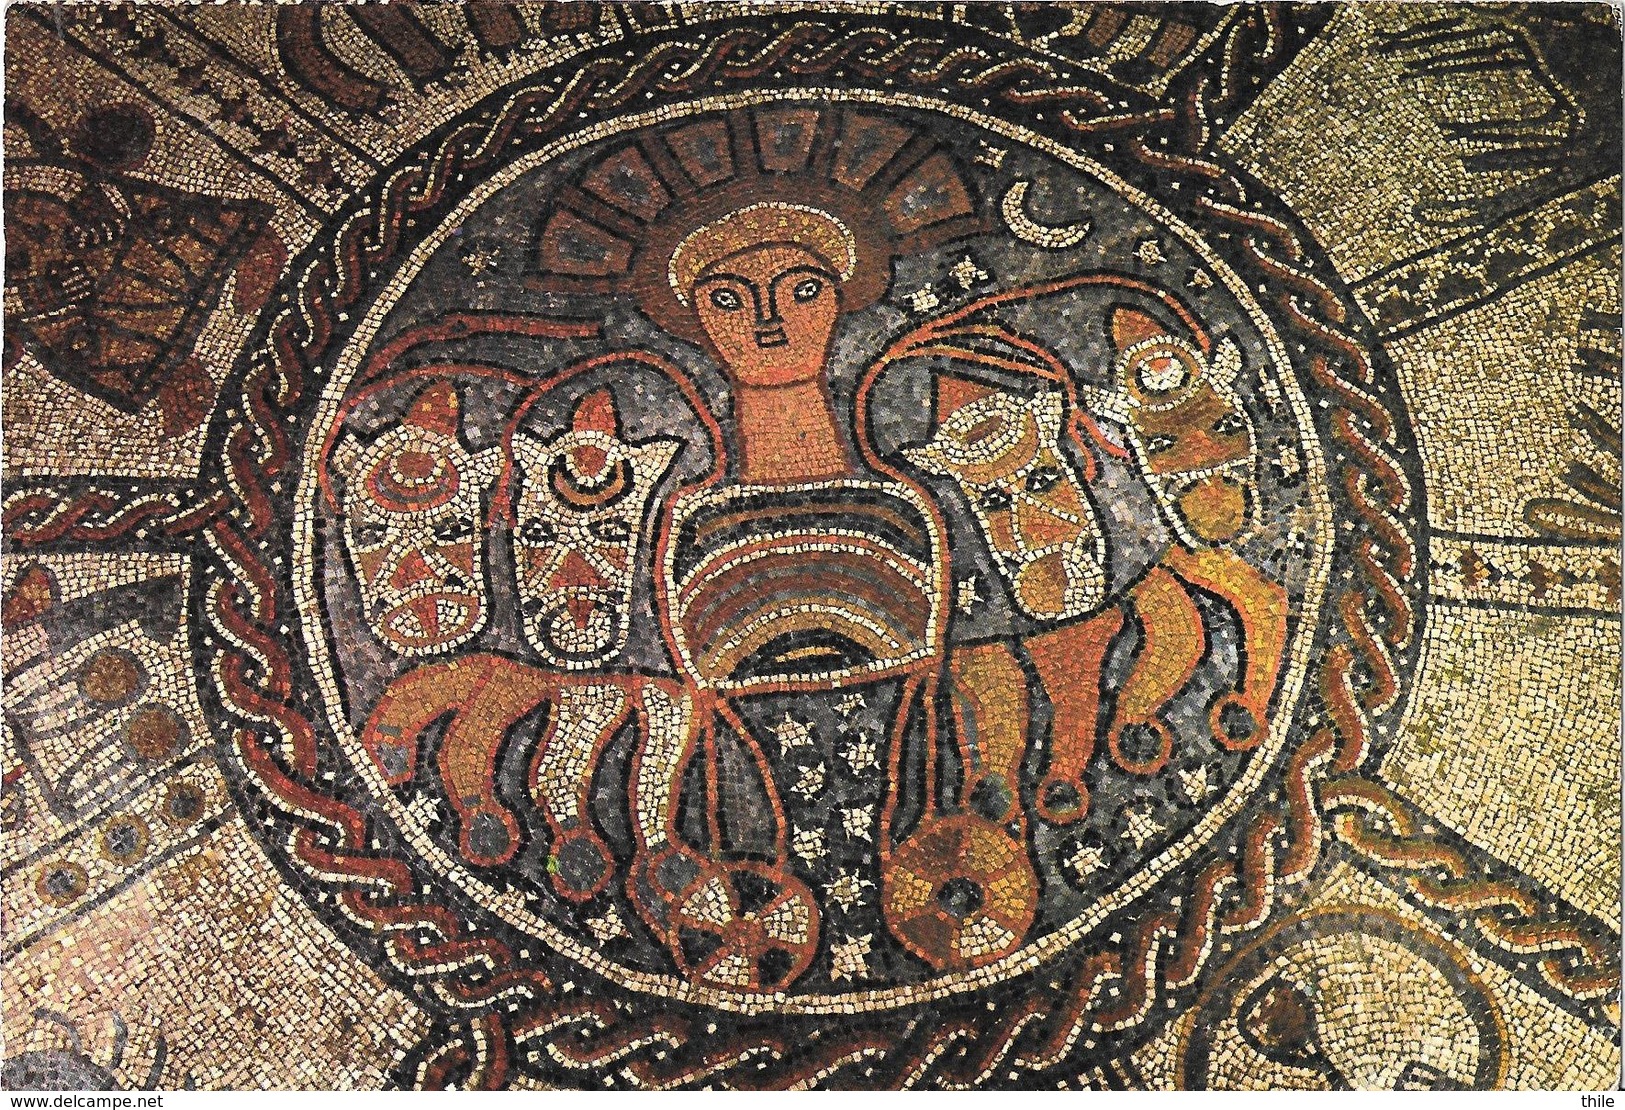 Kwuzat Hefzibat - Mosaic Floor Of The Ancient Beth Alpha Synagogue - The Sun In Its Chariot With Four Horses - Israel